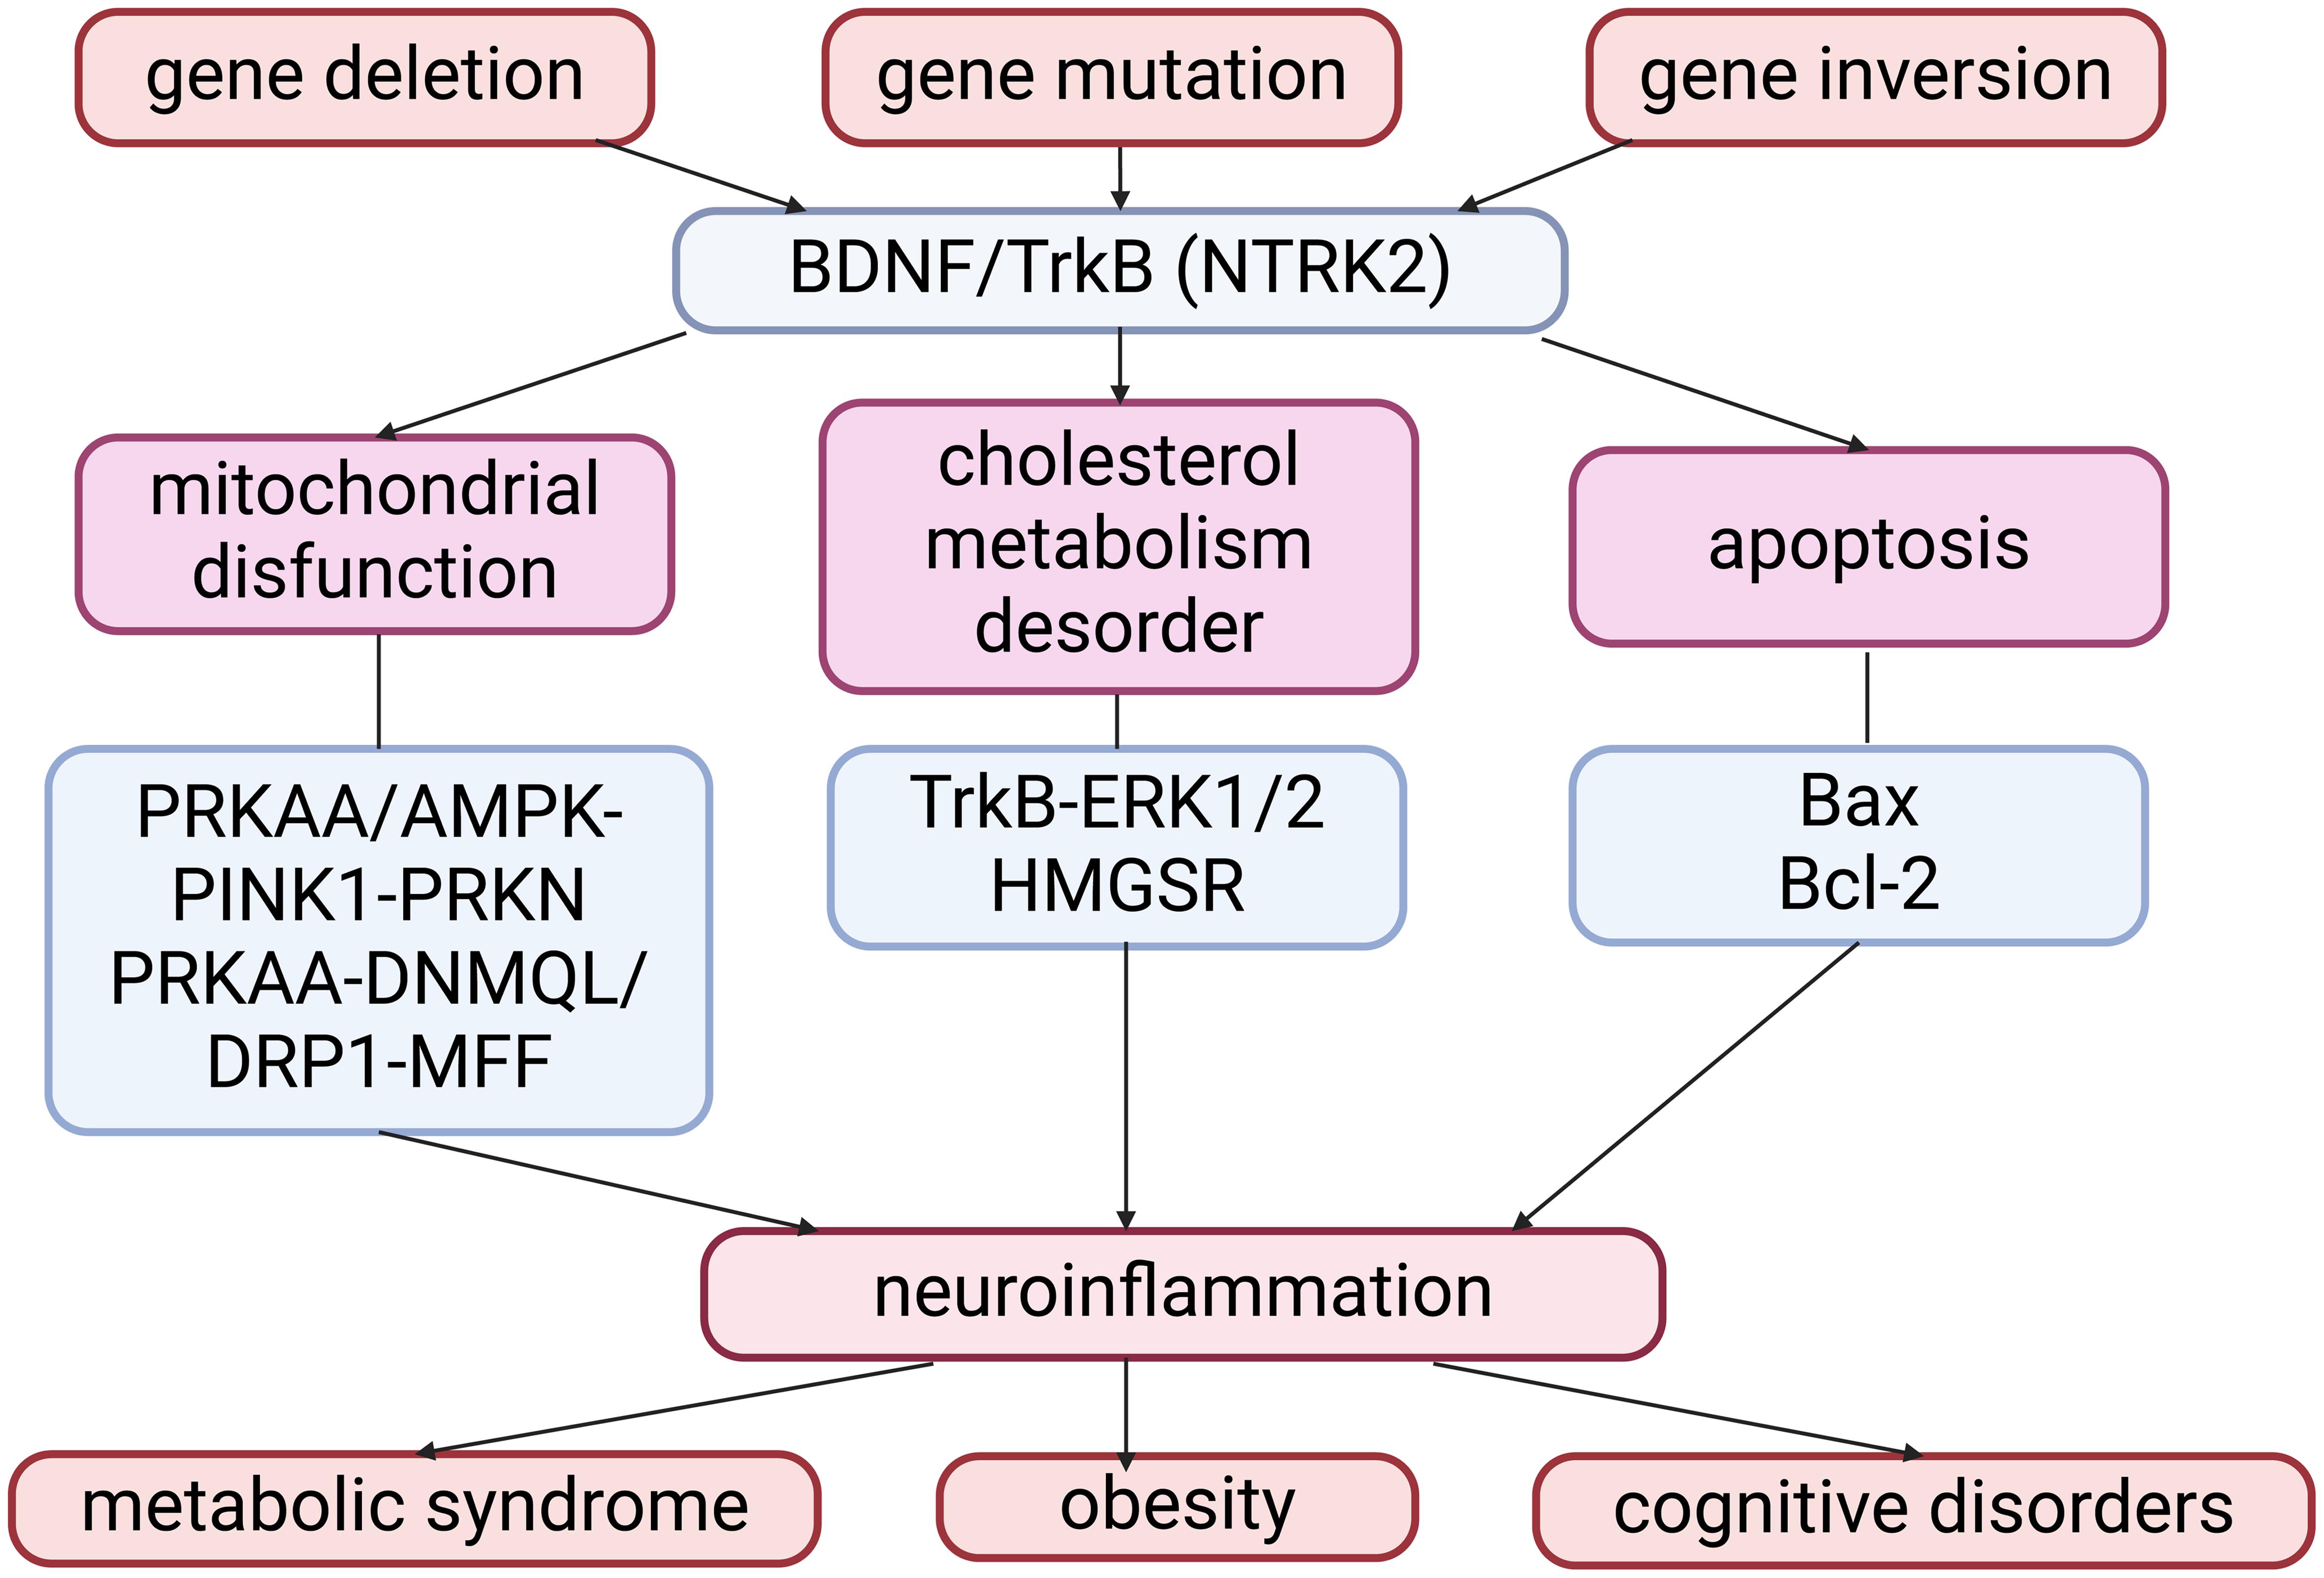 The relationship between BDNF and the development of metabolic diseases.